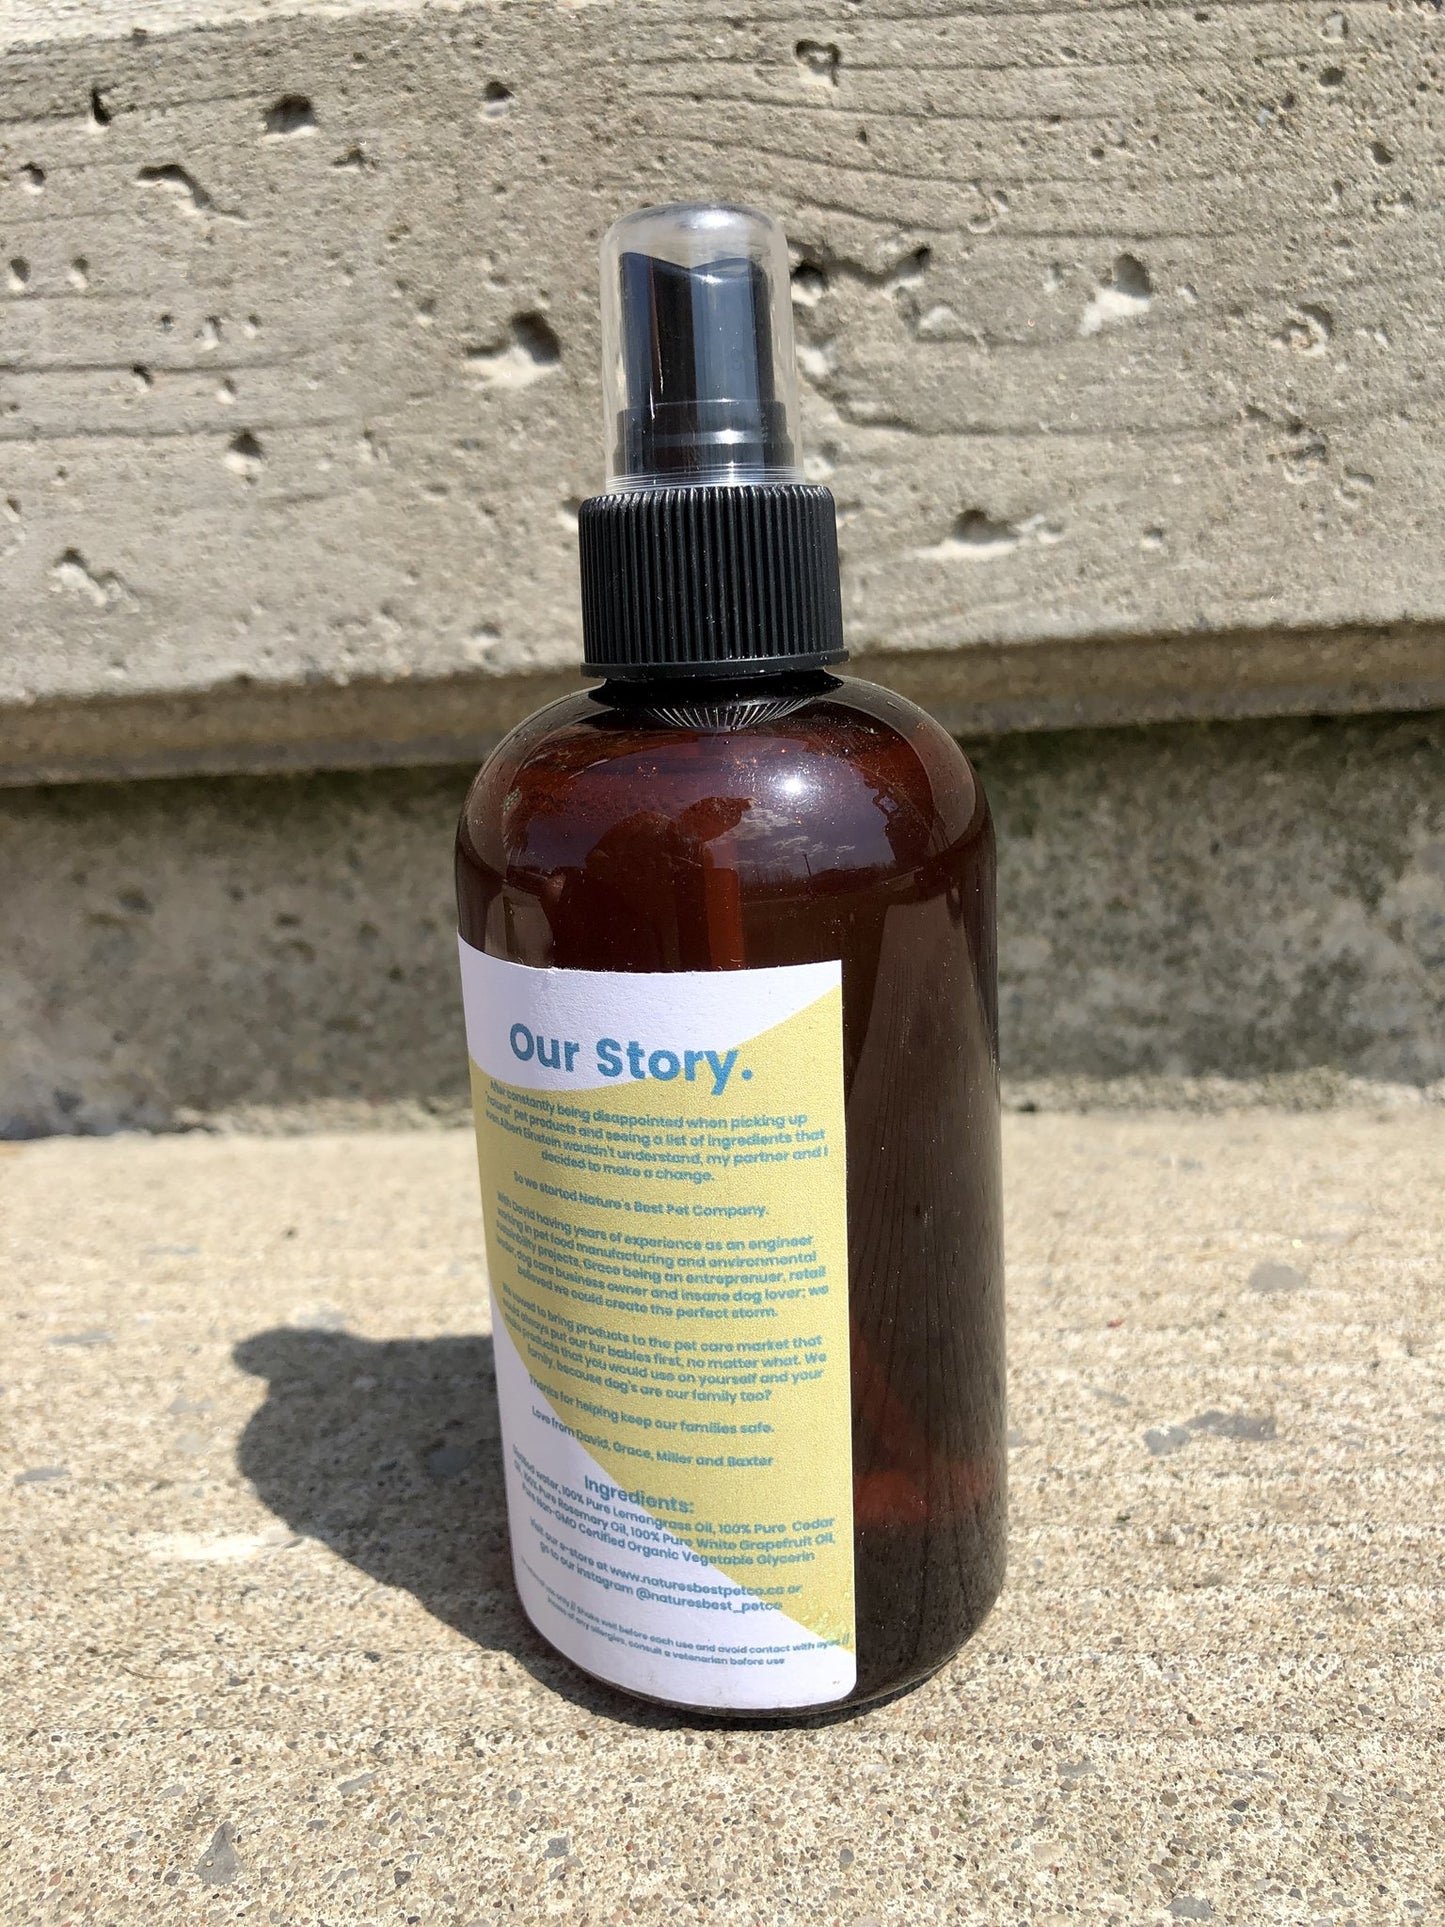 Dog Bug Sprays - by Nature's Best co